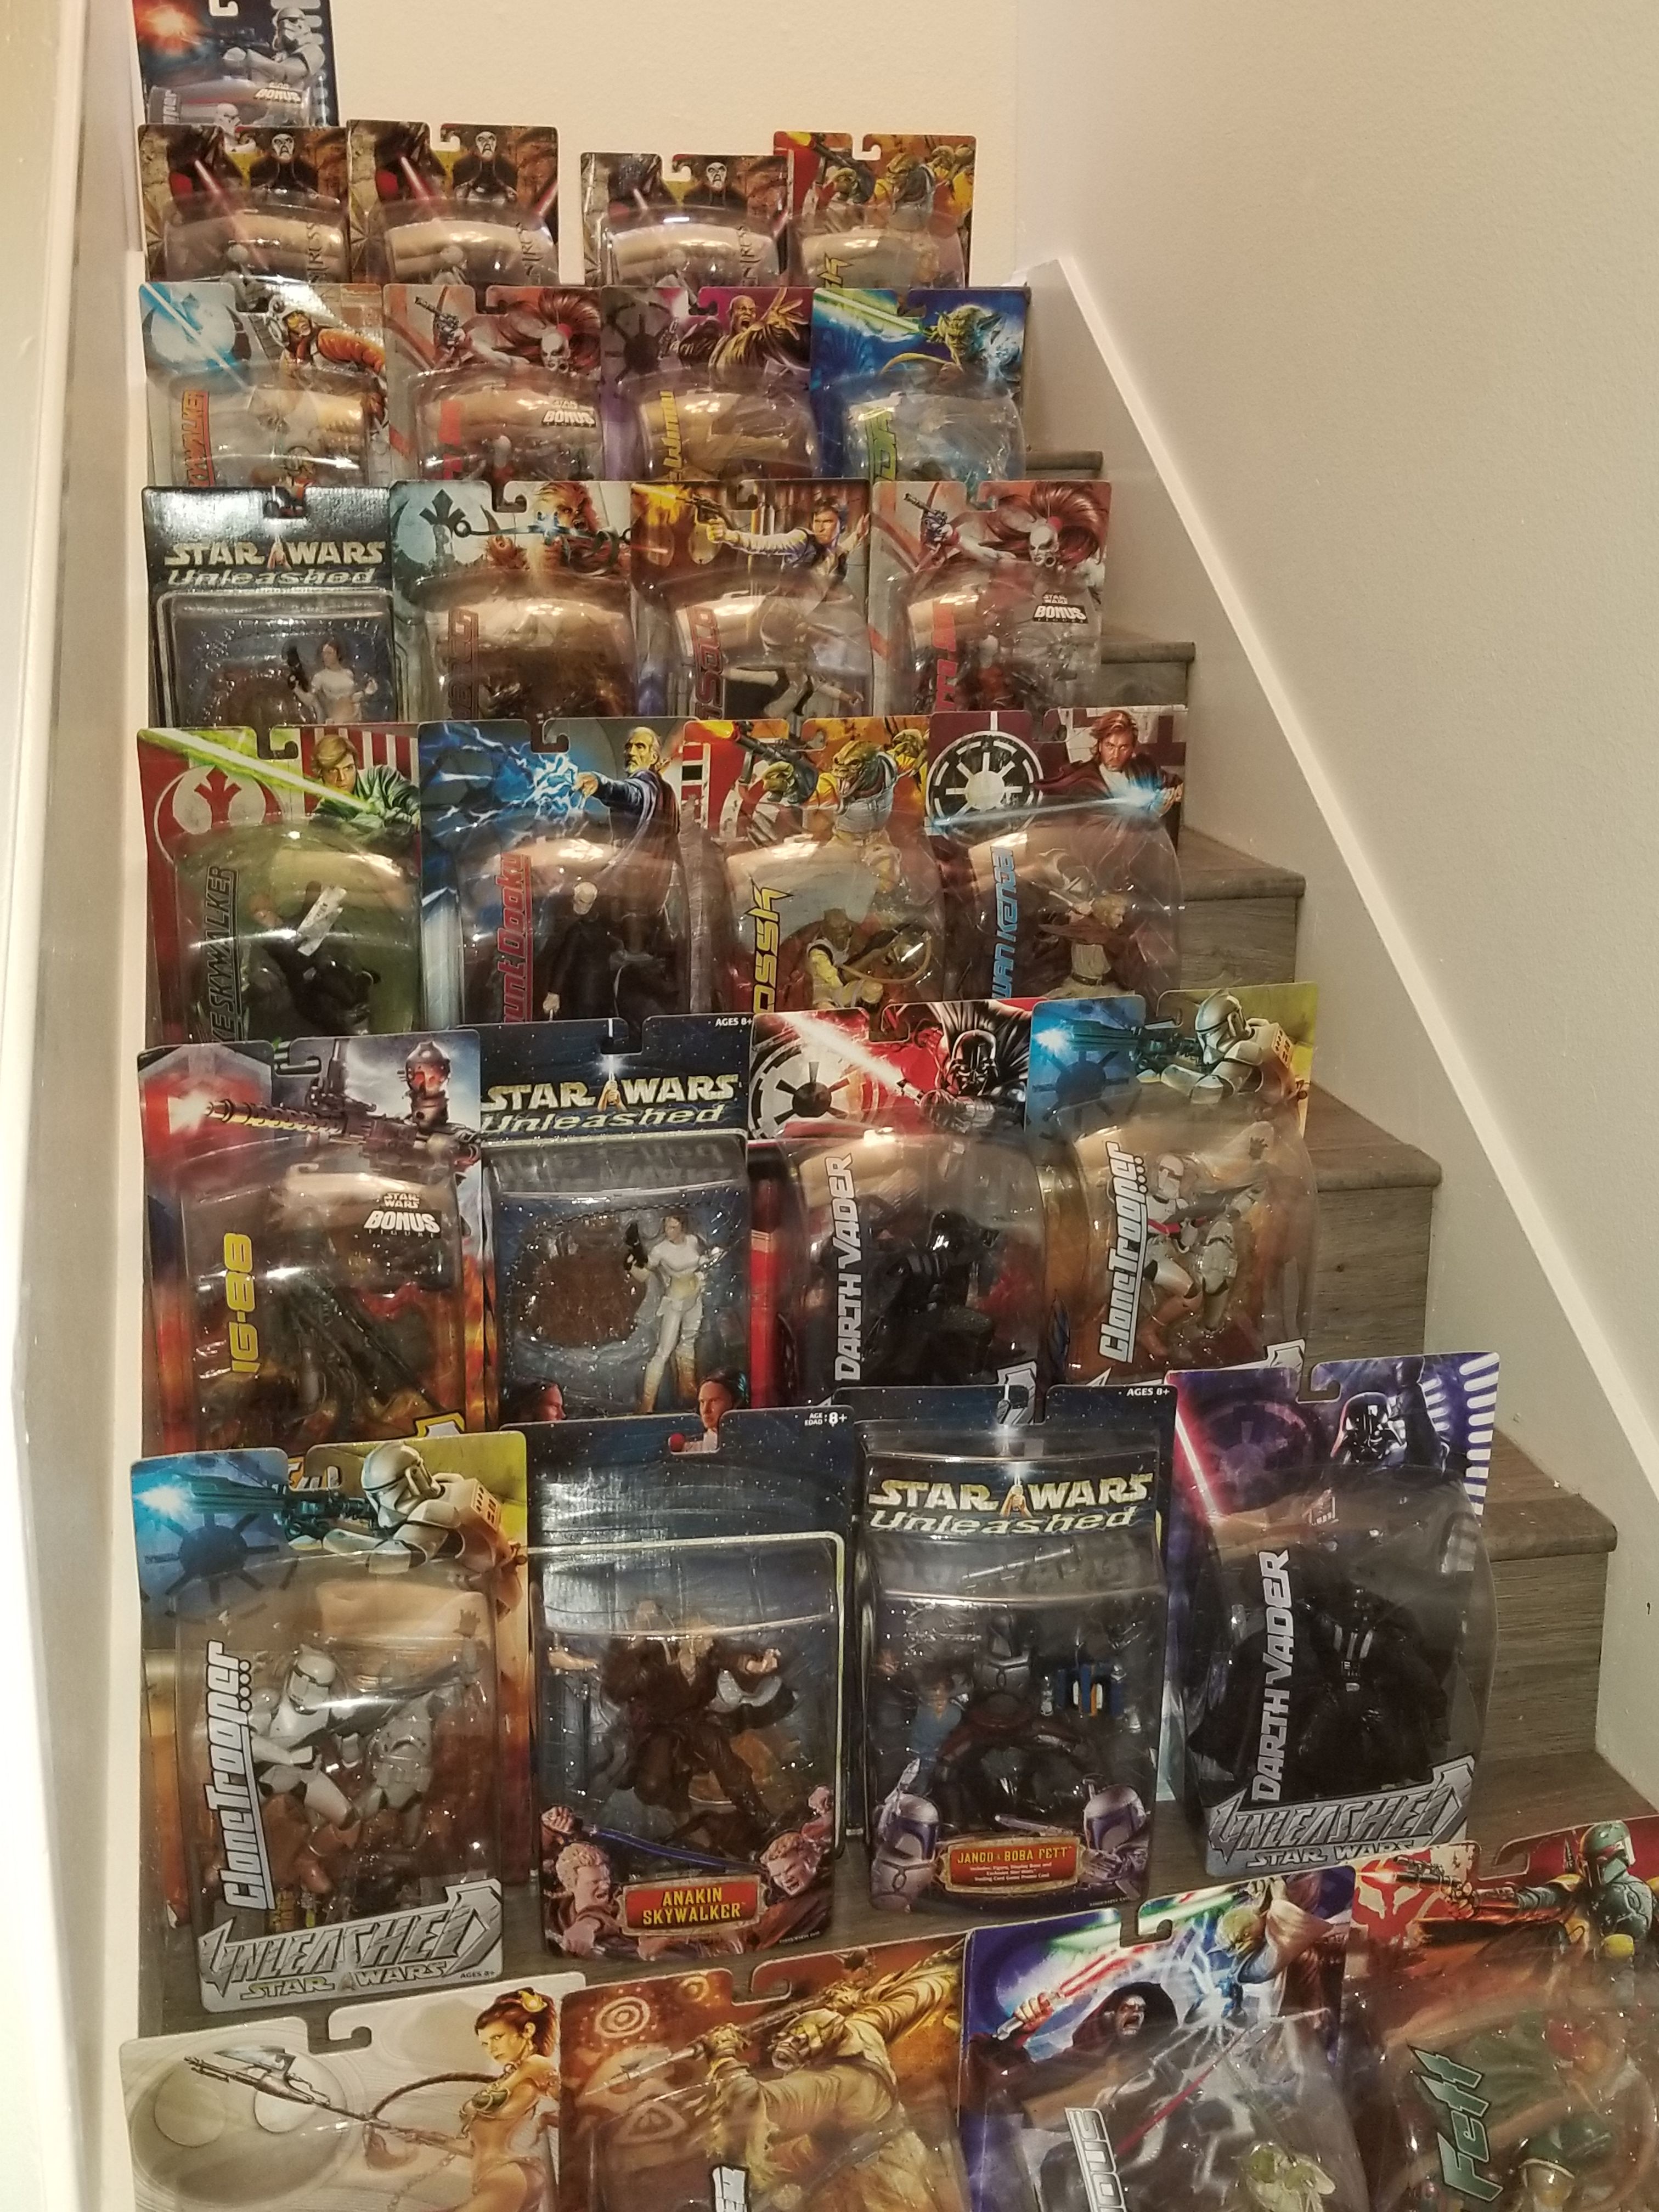 STAR WARS UNLEASHED Figures COLLECTION (30 statues)